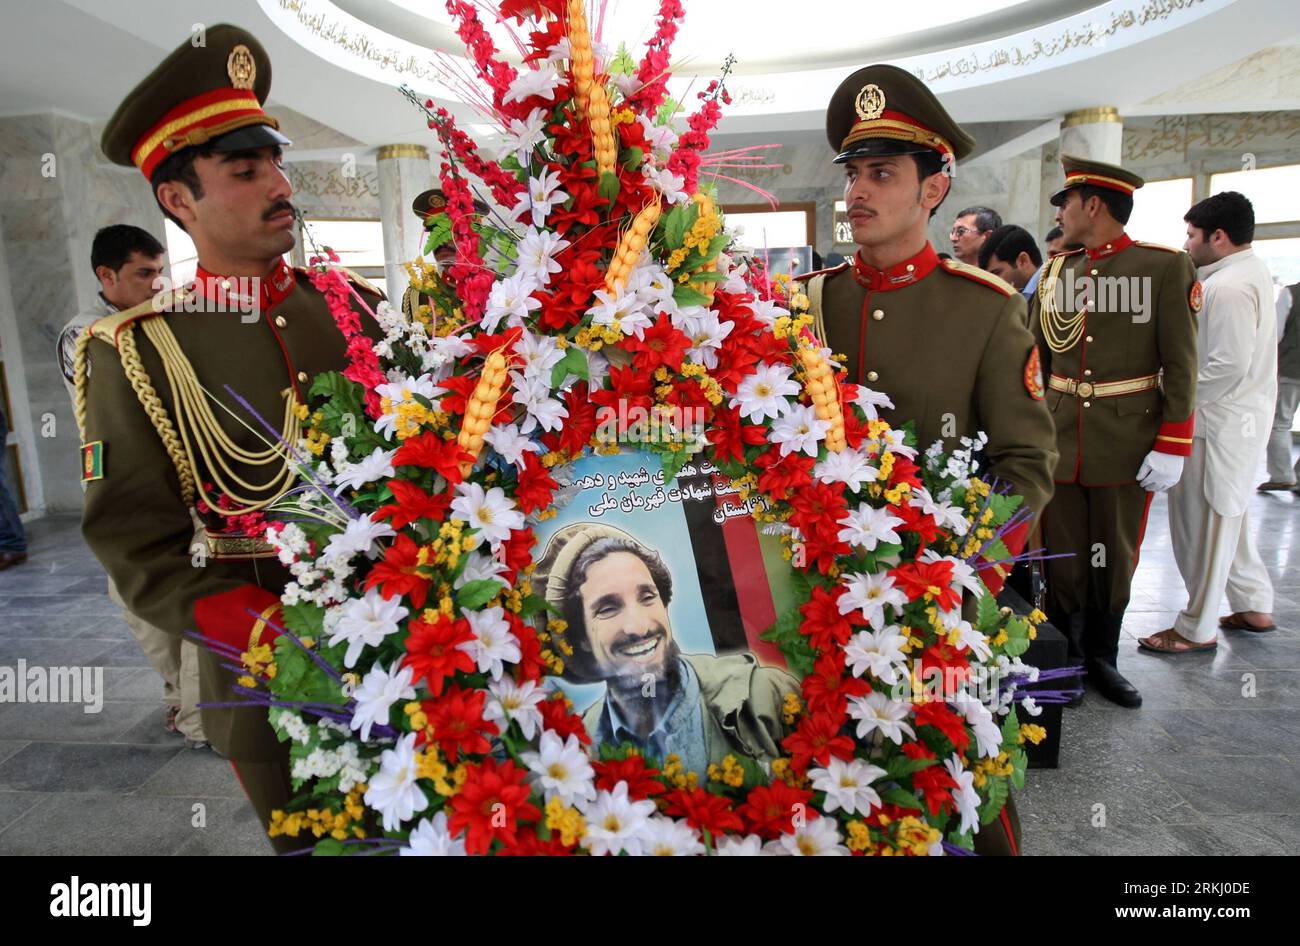 Bildnummer: 55935380  Datum: 10.09.2011  Copyright: imago/Xinhua (110910) -- PANJSHIR, Sept. 10, 2011 (Xinhua) -- Afghan honor guards carry a wreath during the ceremony marking the 10th anniversary of the death of Ahmad Shah Massoud in Panjshir Province, Afghanistan, Sept. 10, 2011. Anti-Taliban leader and commander of Northern Alliance Ahmad Shah Massoud was assassinated in a suicide attack by some Arabs pretending to be journalists on September 9, 2001, and two days later the September 11 attacks on the United States happened. (Xinhua/Ahmad Massoud)(wjd) AFGHANISTAN-AHMAD SHAH MASSOUD-DEATH- Stock Photo